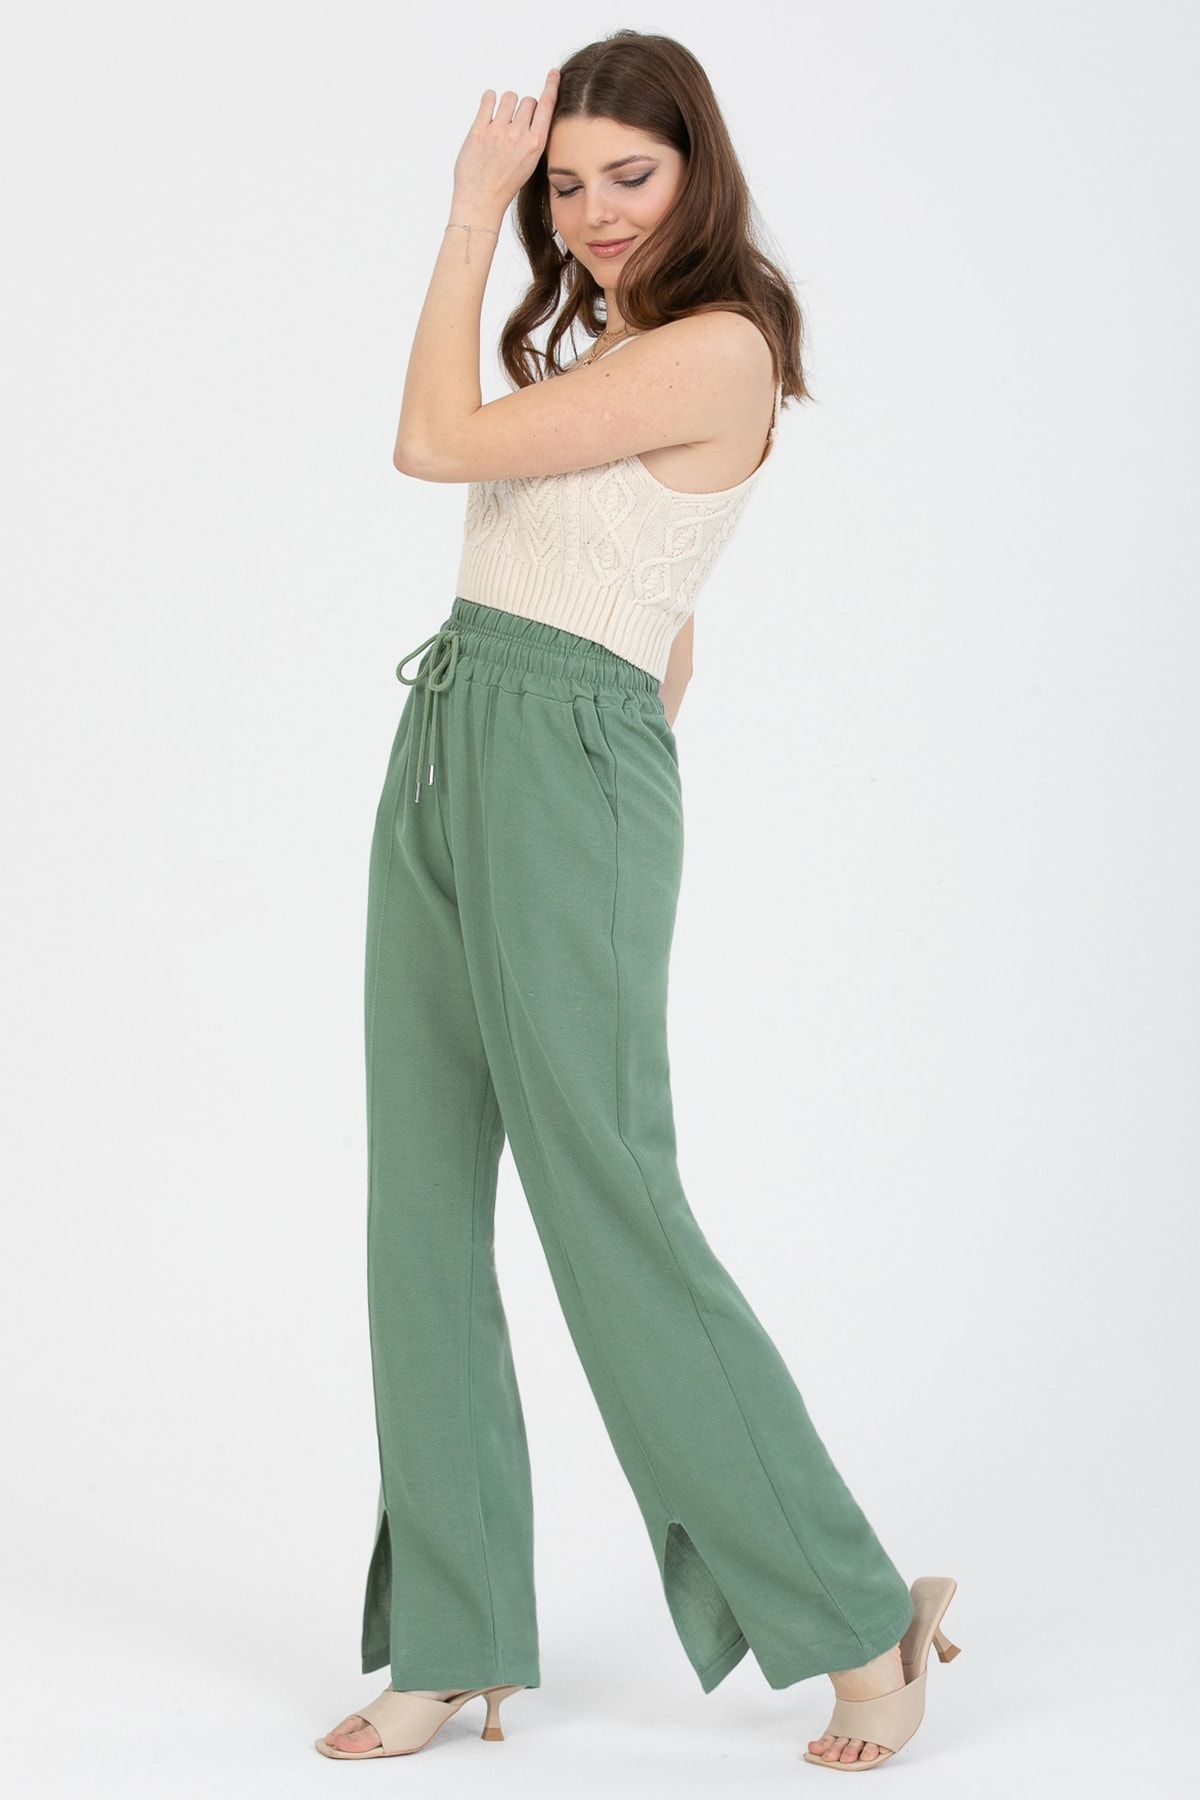 MD trend Women's Mint Green Elastic Waist Tied Linen Trousers with Front  Seam Detail and Leg Slits - Trendyol